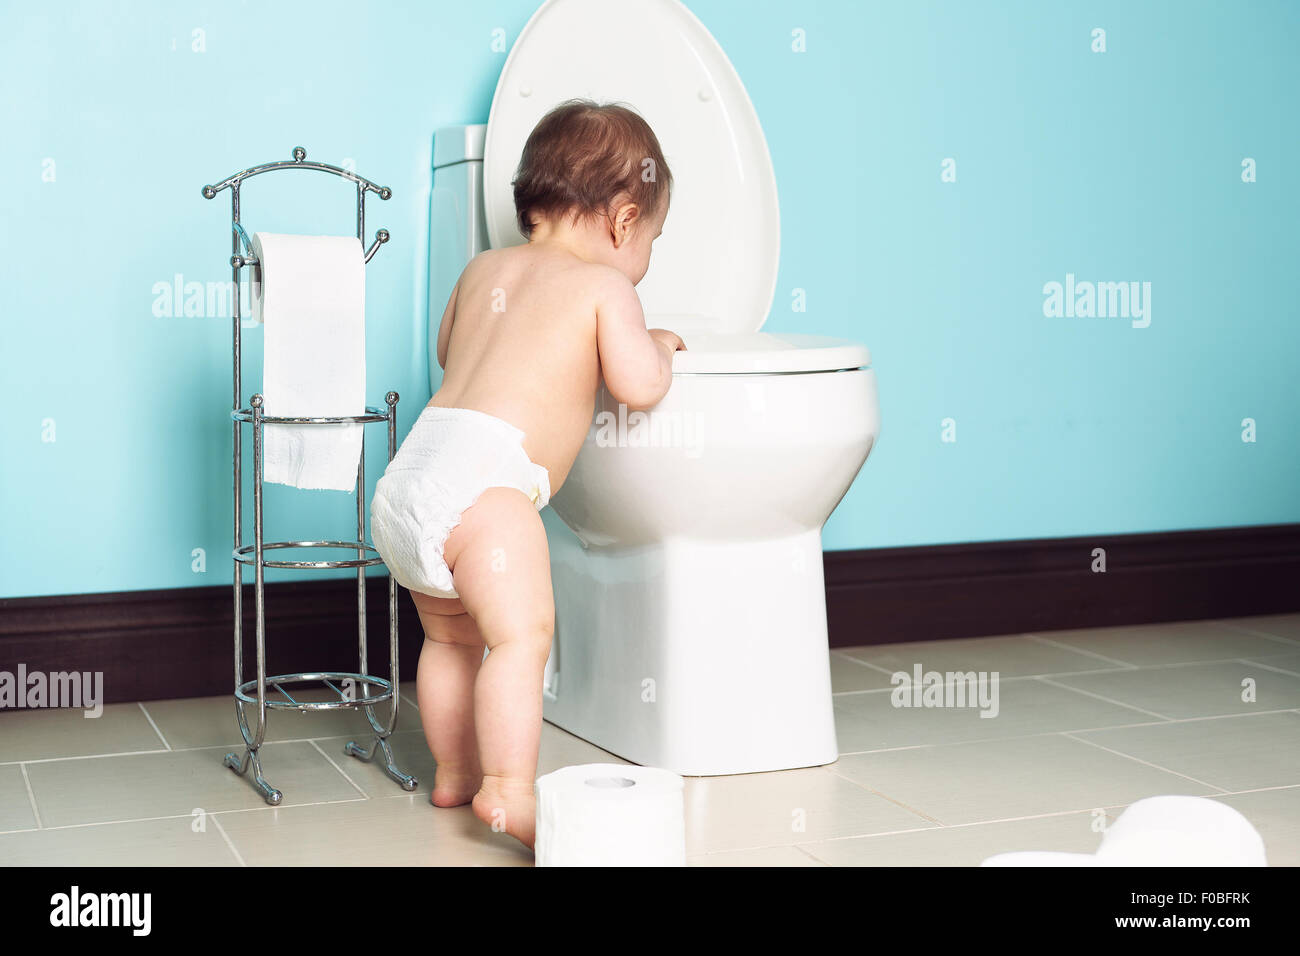 Toddler in bathroom look at the toilet Stock Photo